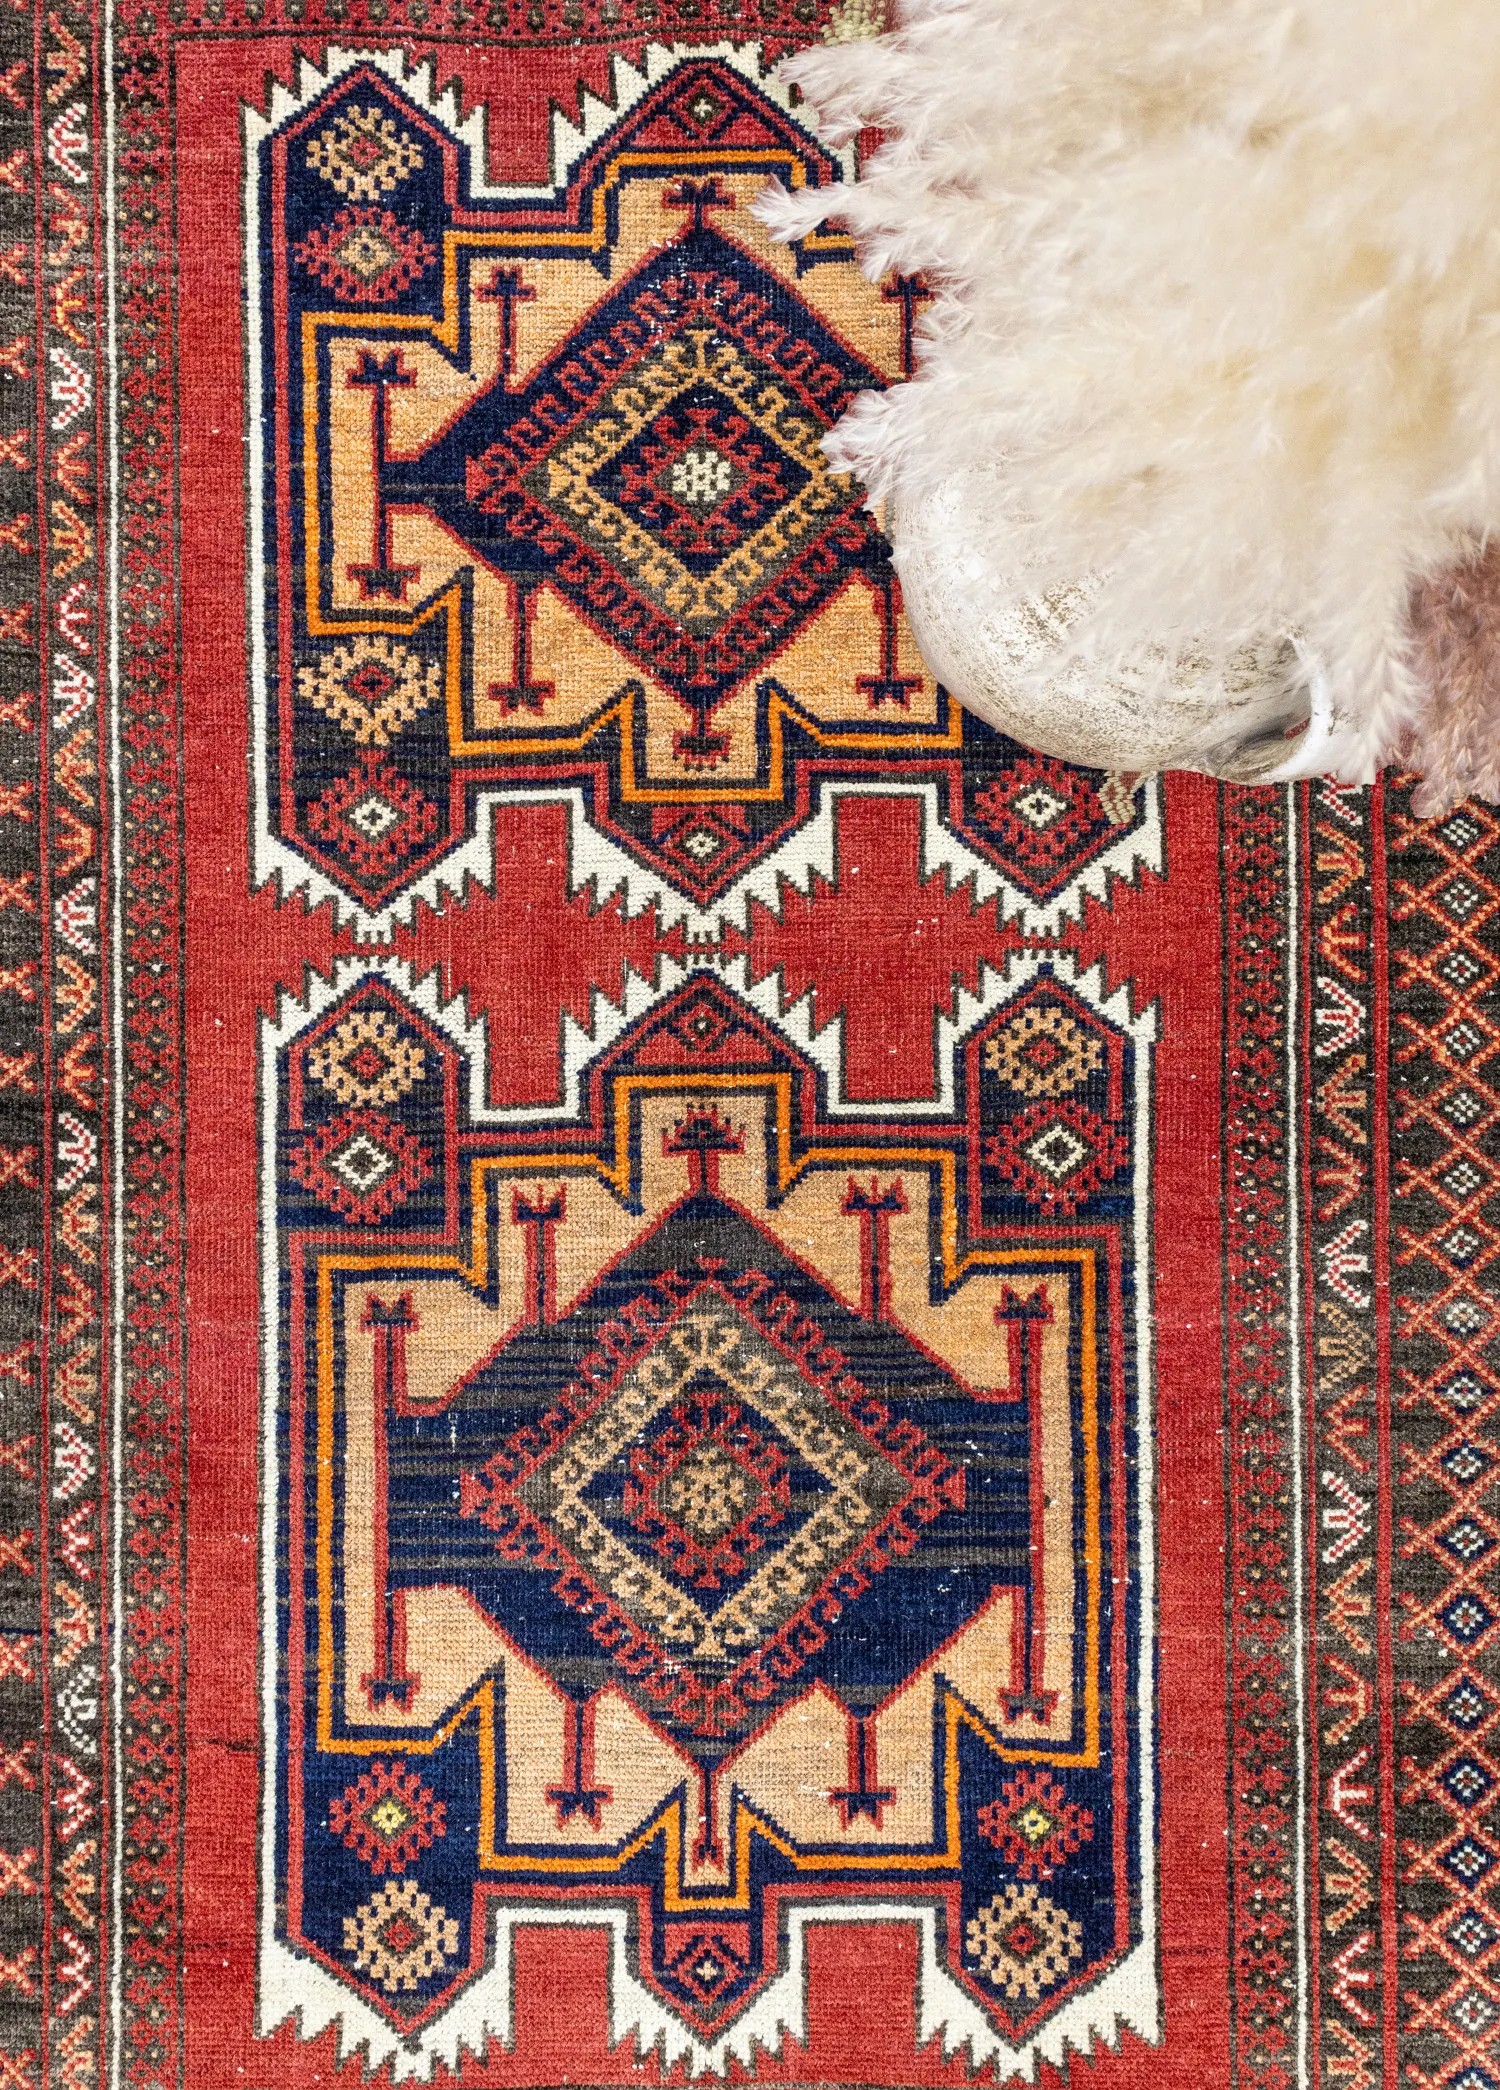 Carpets Motifs and Their Meanings